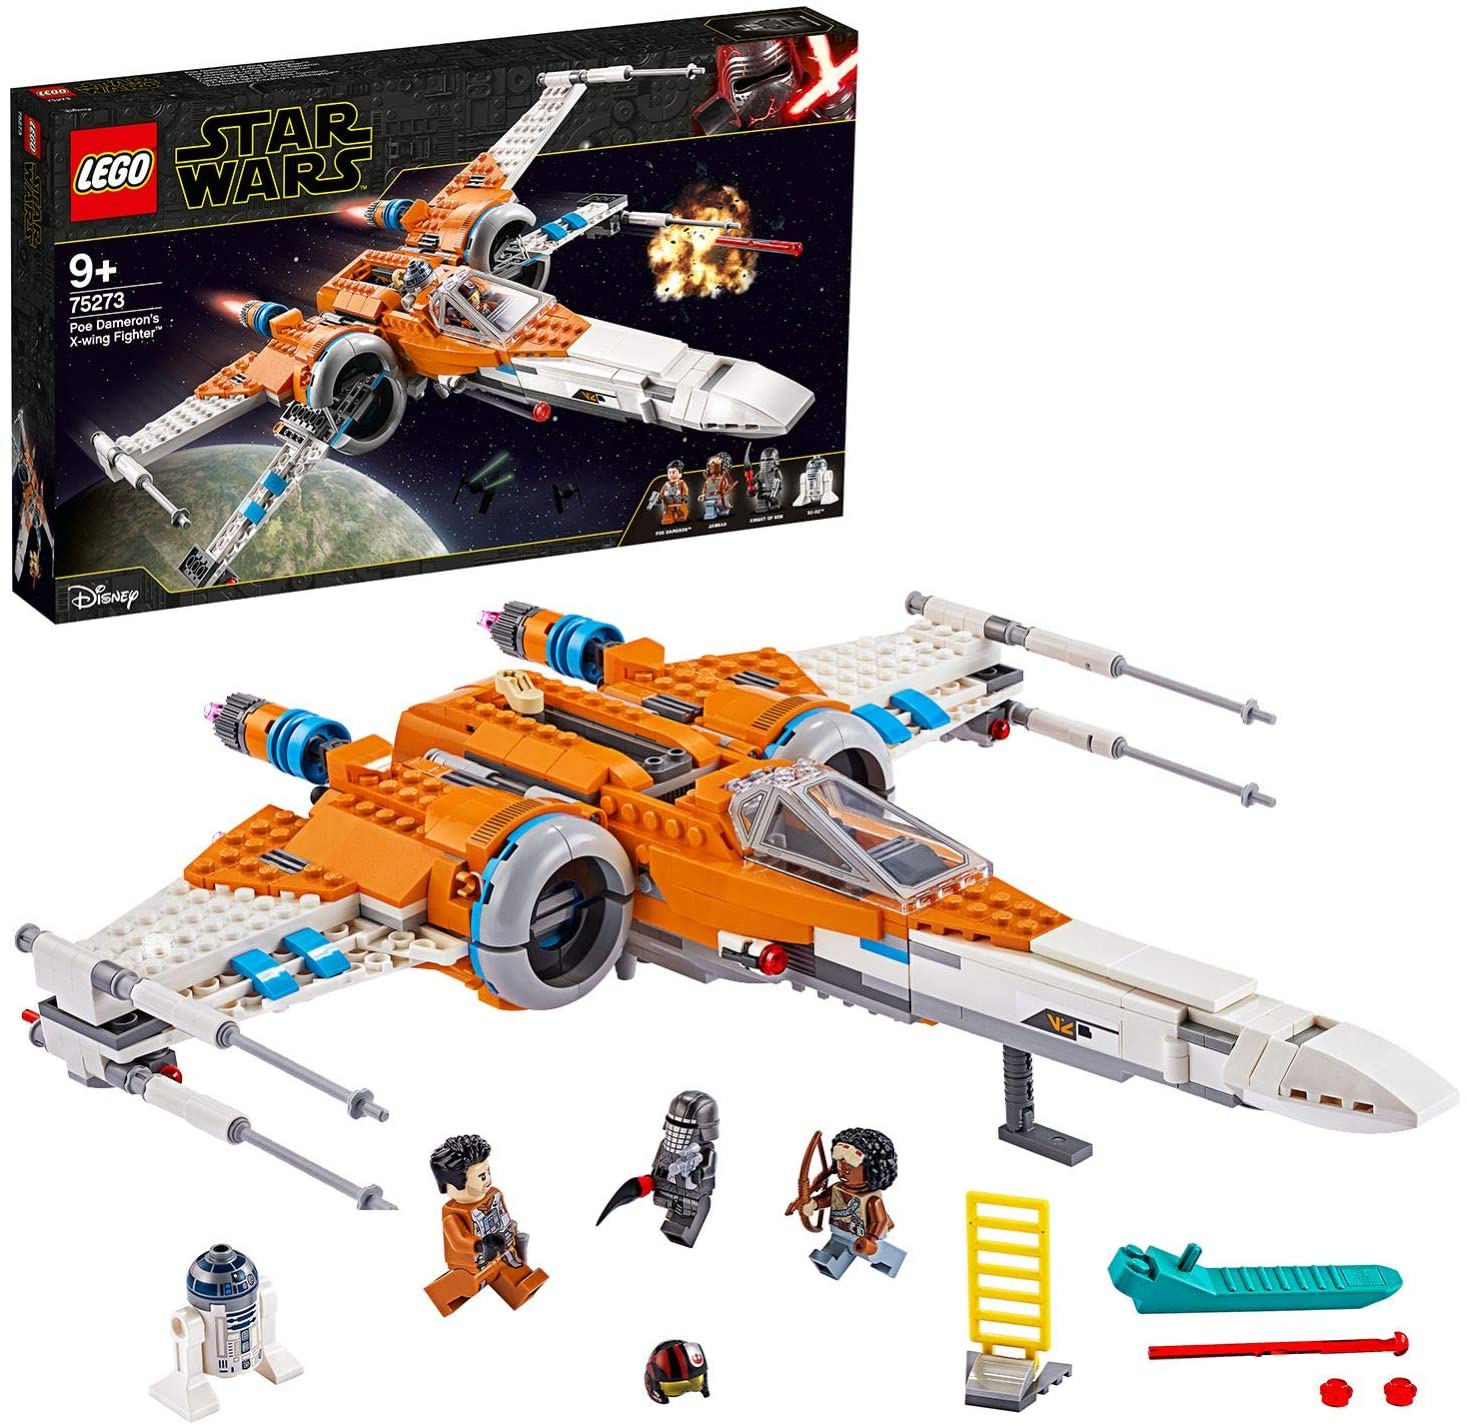 LEGO 75273 Star Wars Poe X-wing Fighter Building Set, The of Skywalker Movie Series – TopToy